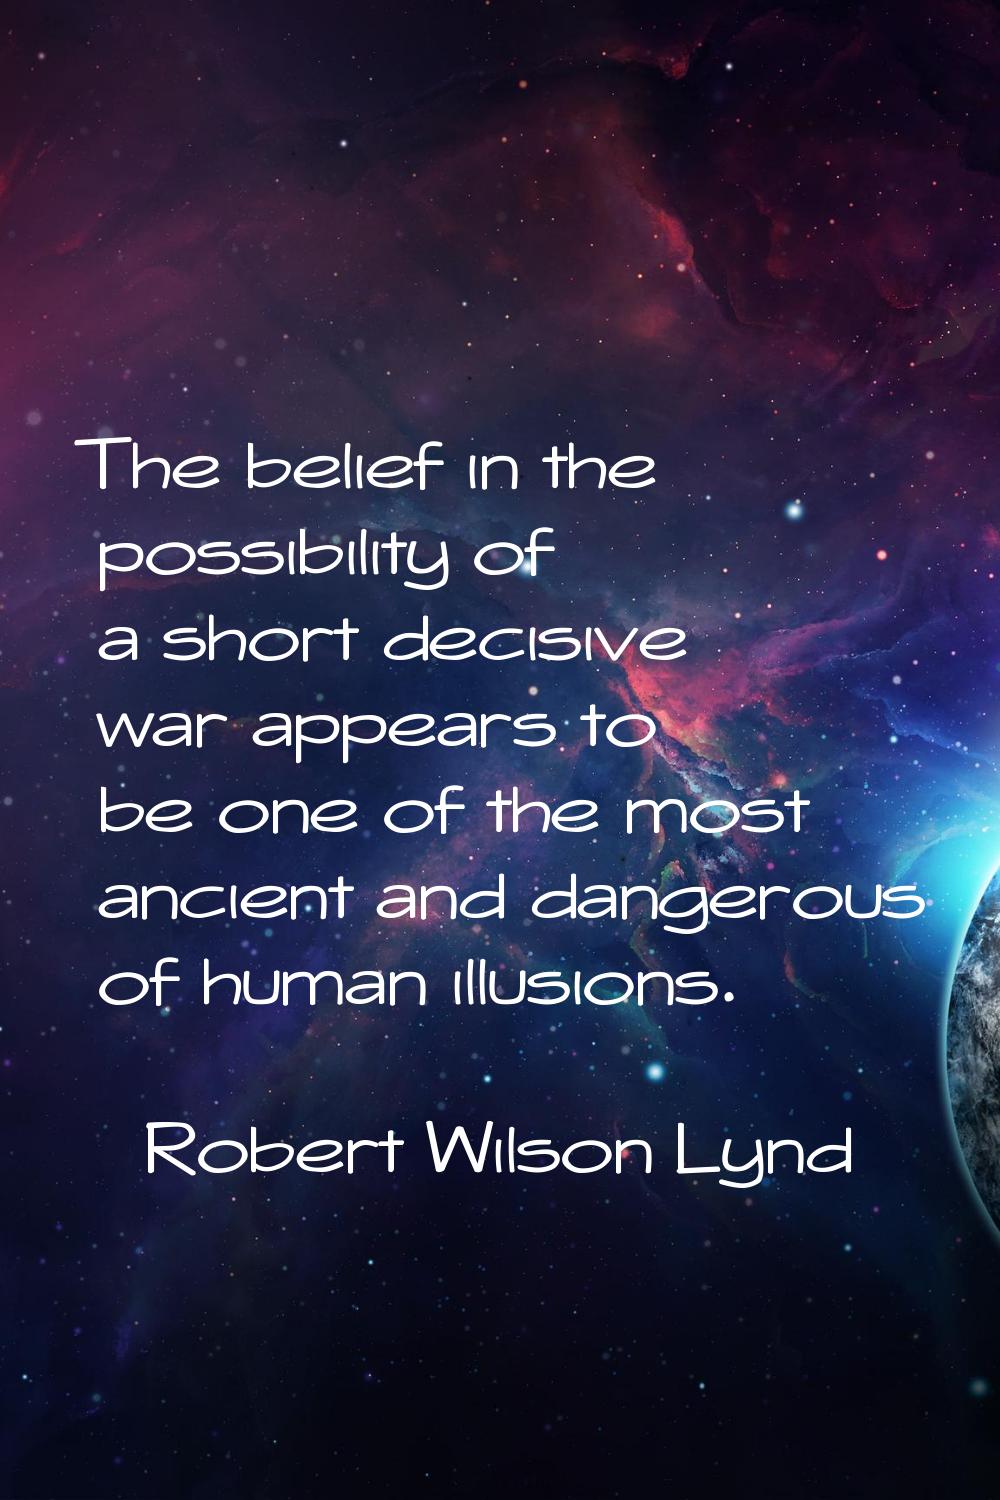 The belief in the possibility of a short decisive war appears to be one of the most ancient and dan